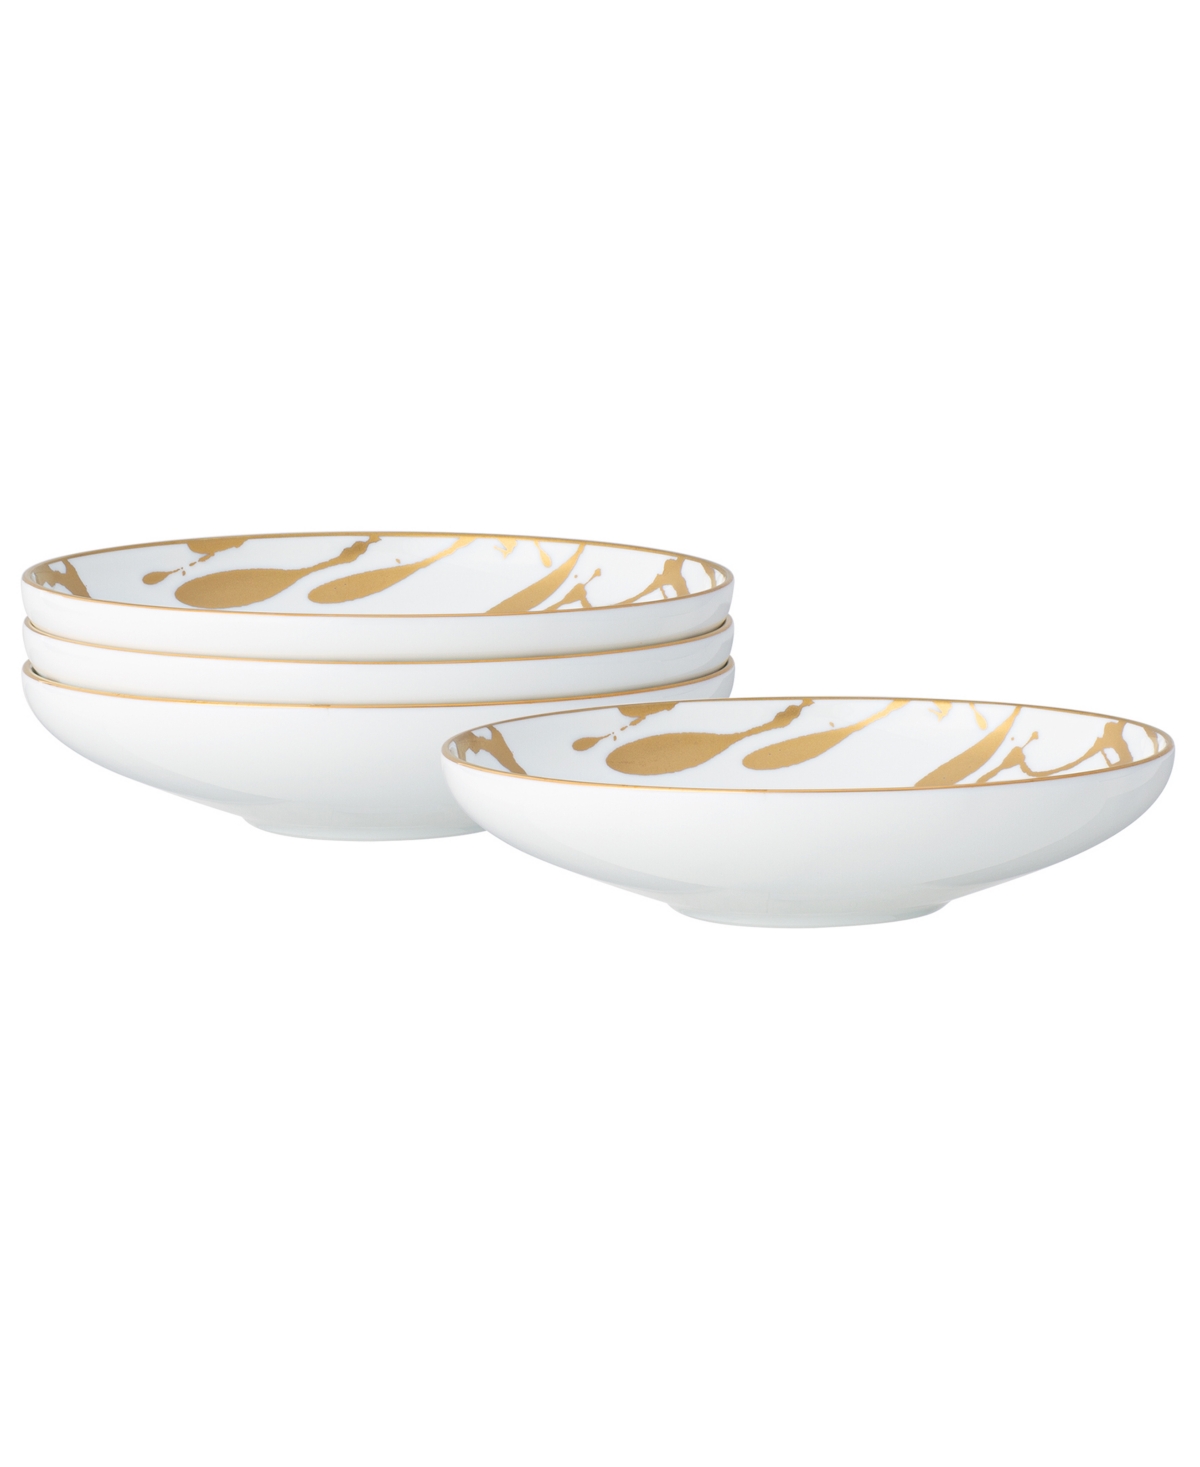 Noritake Raptures Gold Set Of 4 Fruit Bowls, Service For 4 In White Gold-tone